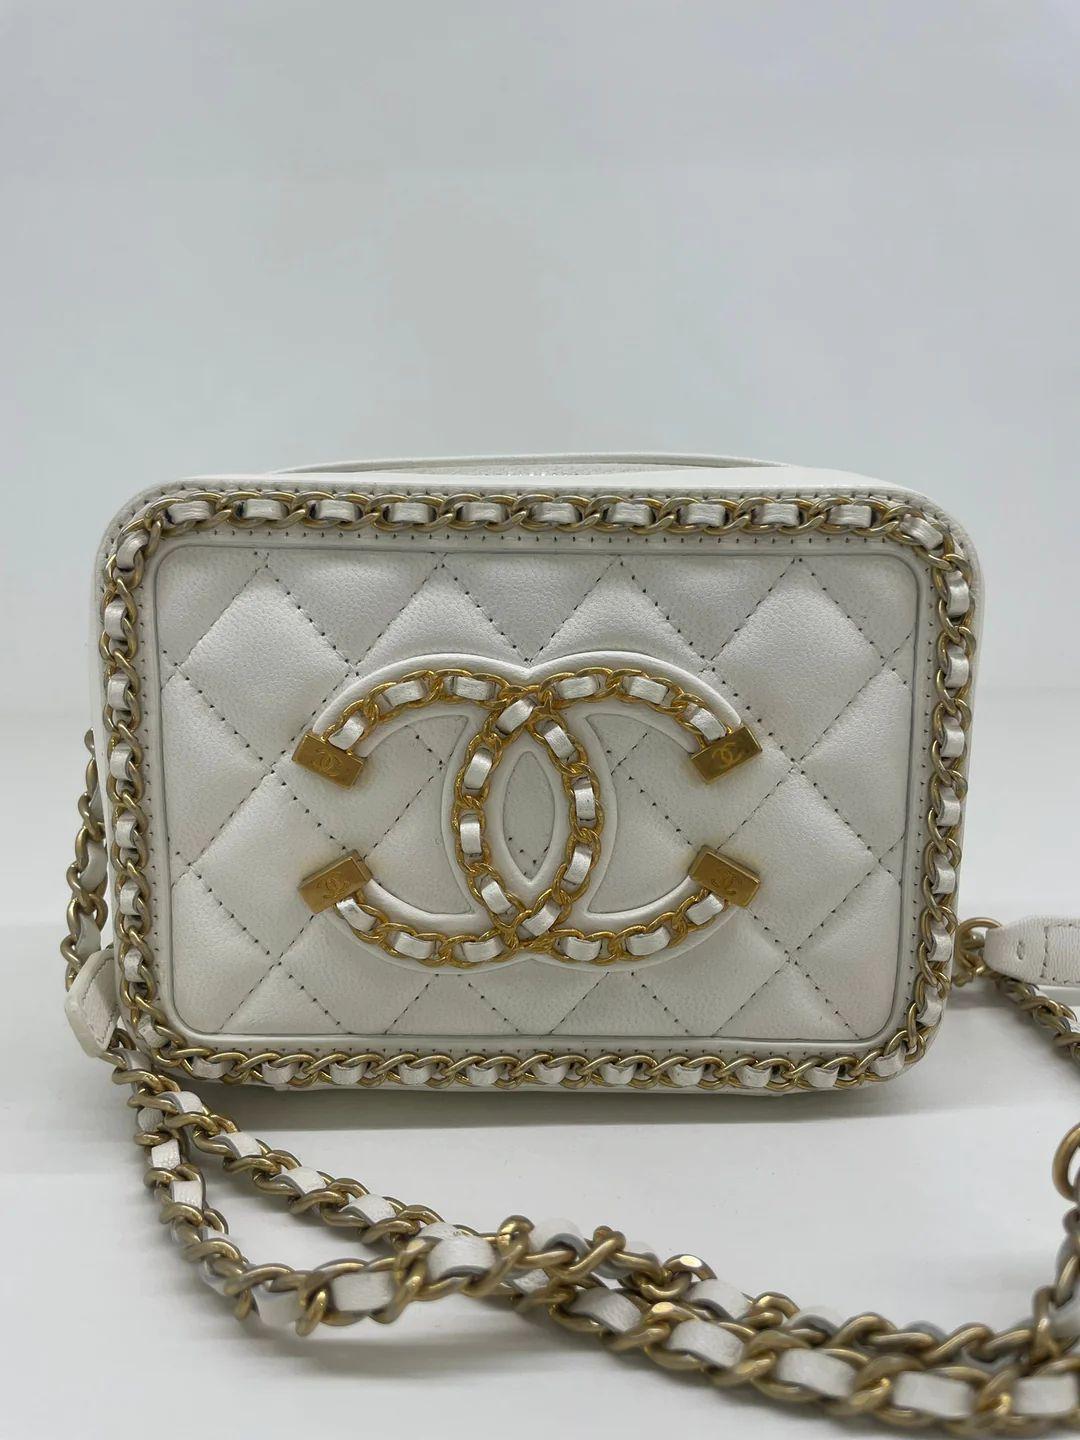 Chanel White Vanity Small - Chain Detail For Sale 3